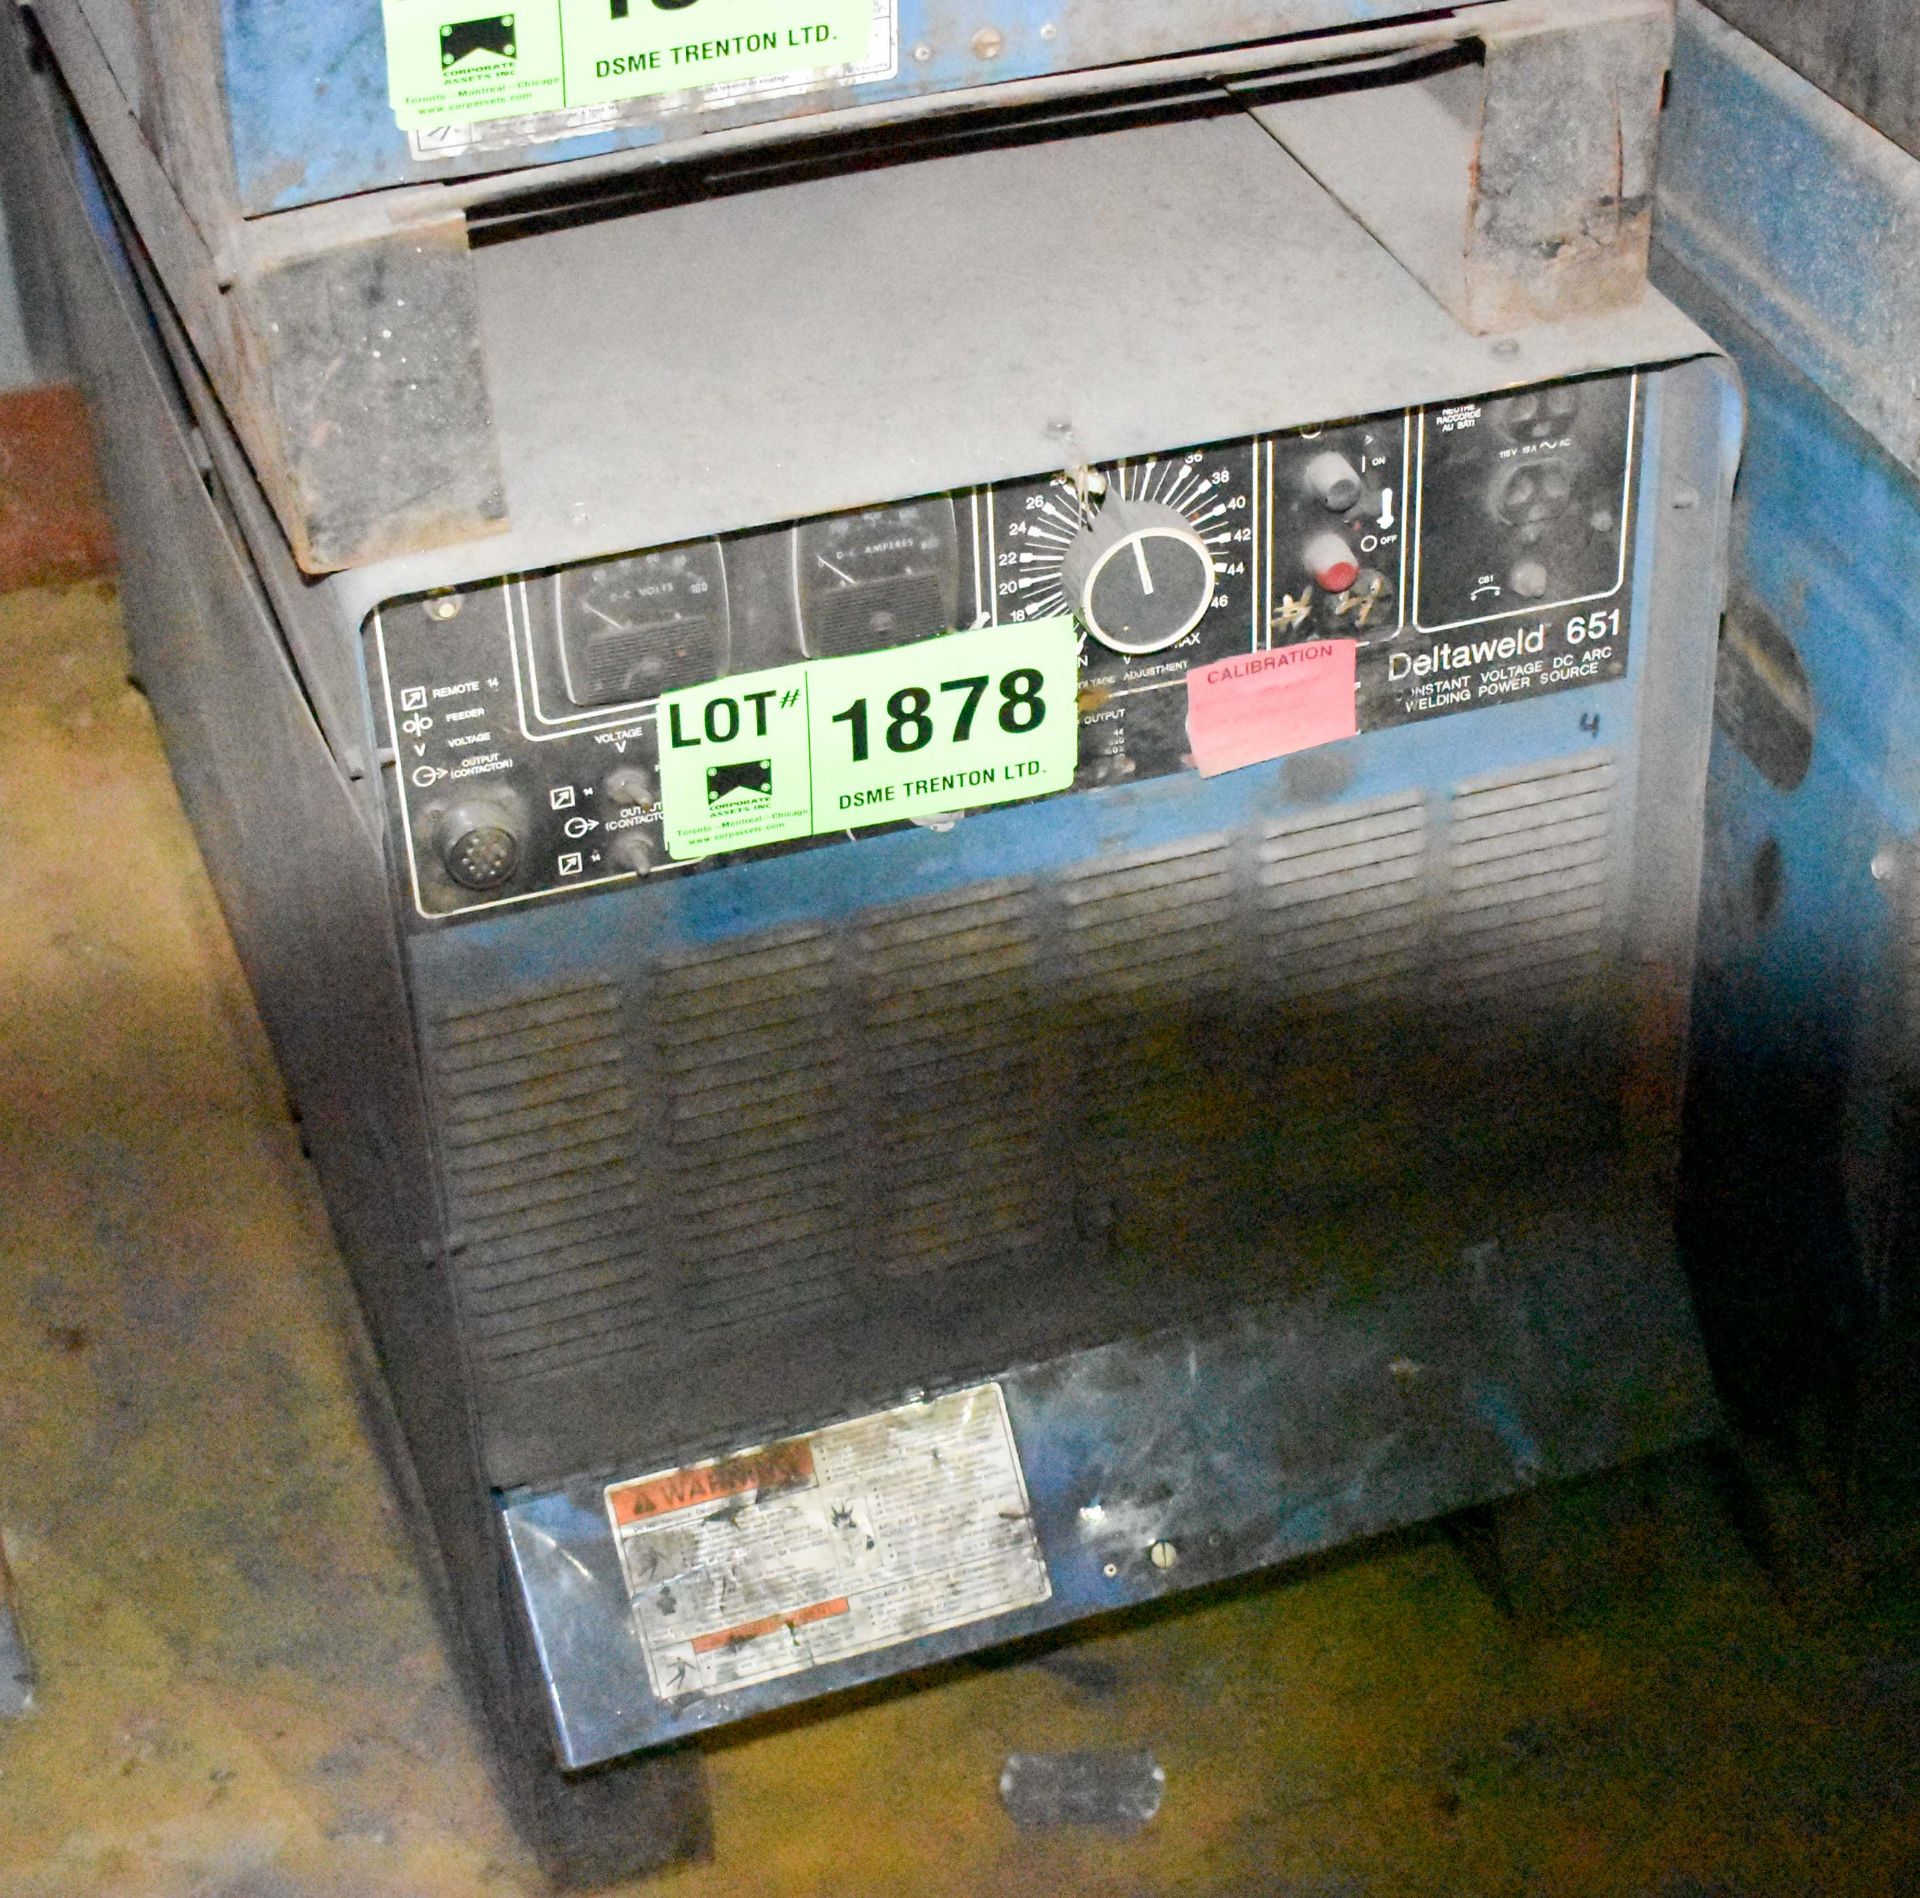 MILLER DELTAWELD 651 WELDING POWER SOURCE [RIGGING FEE FOR LOT# 1878 - $40 USD +PLUS TAXES]